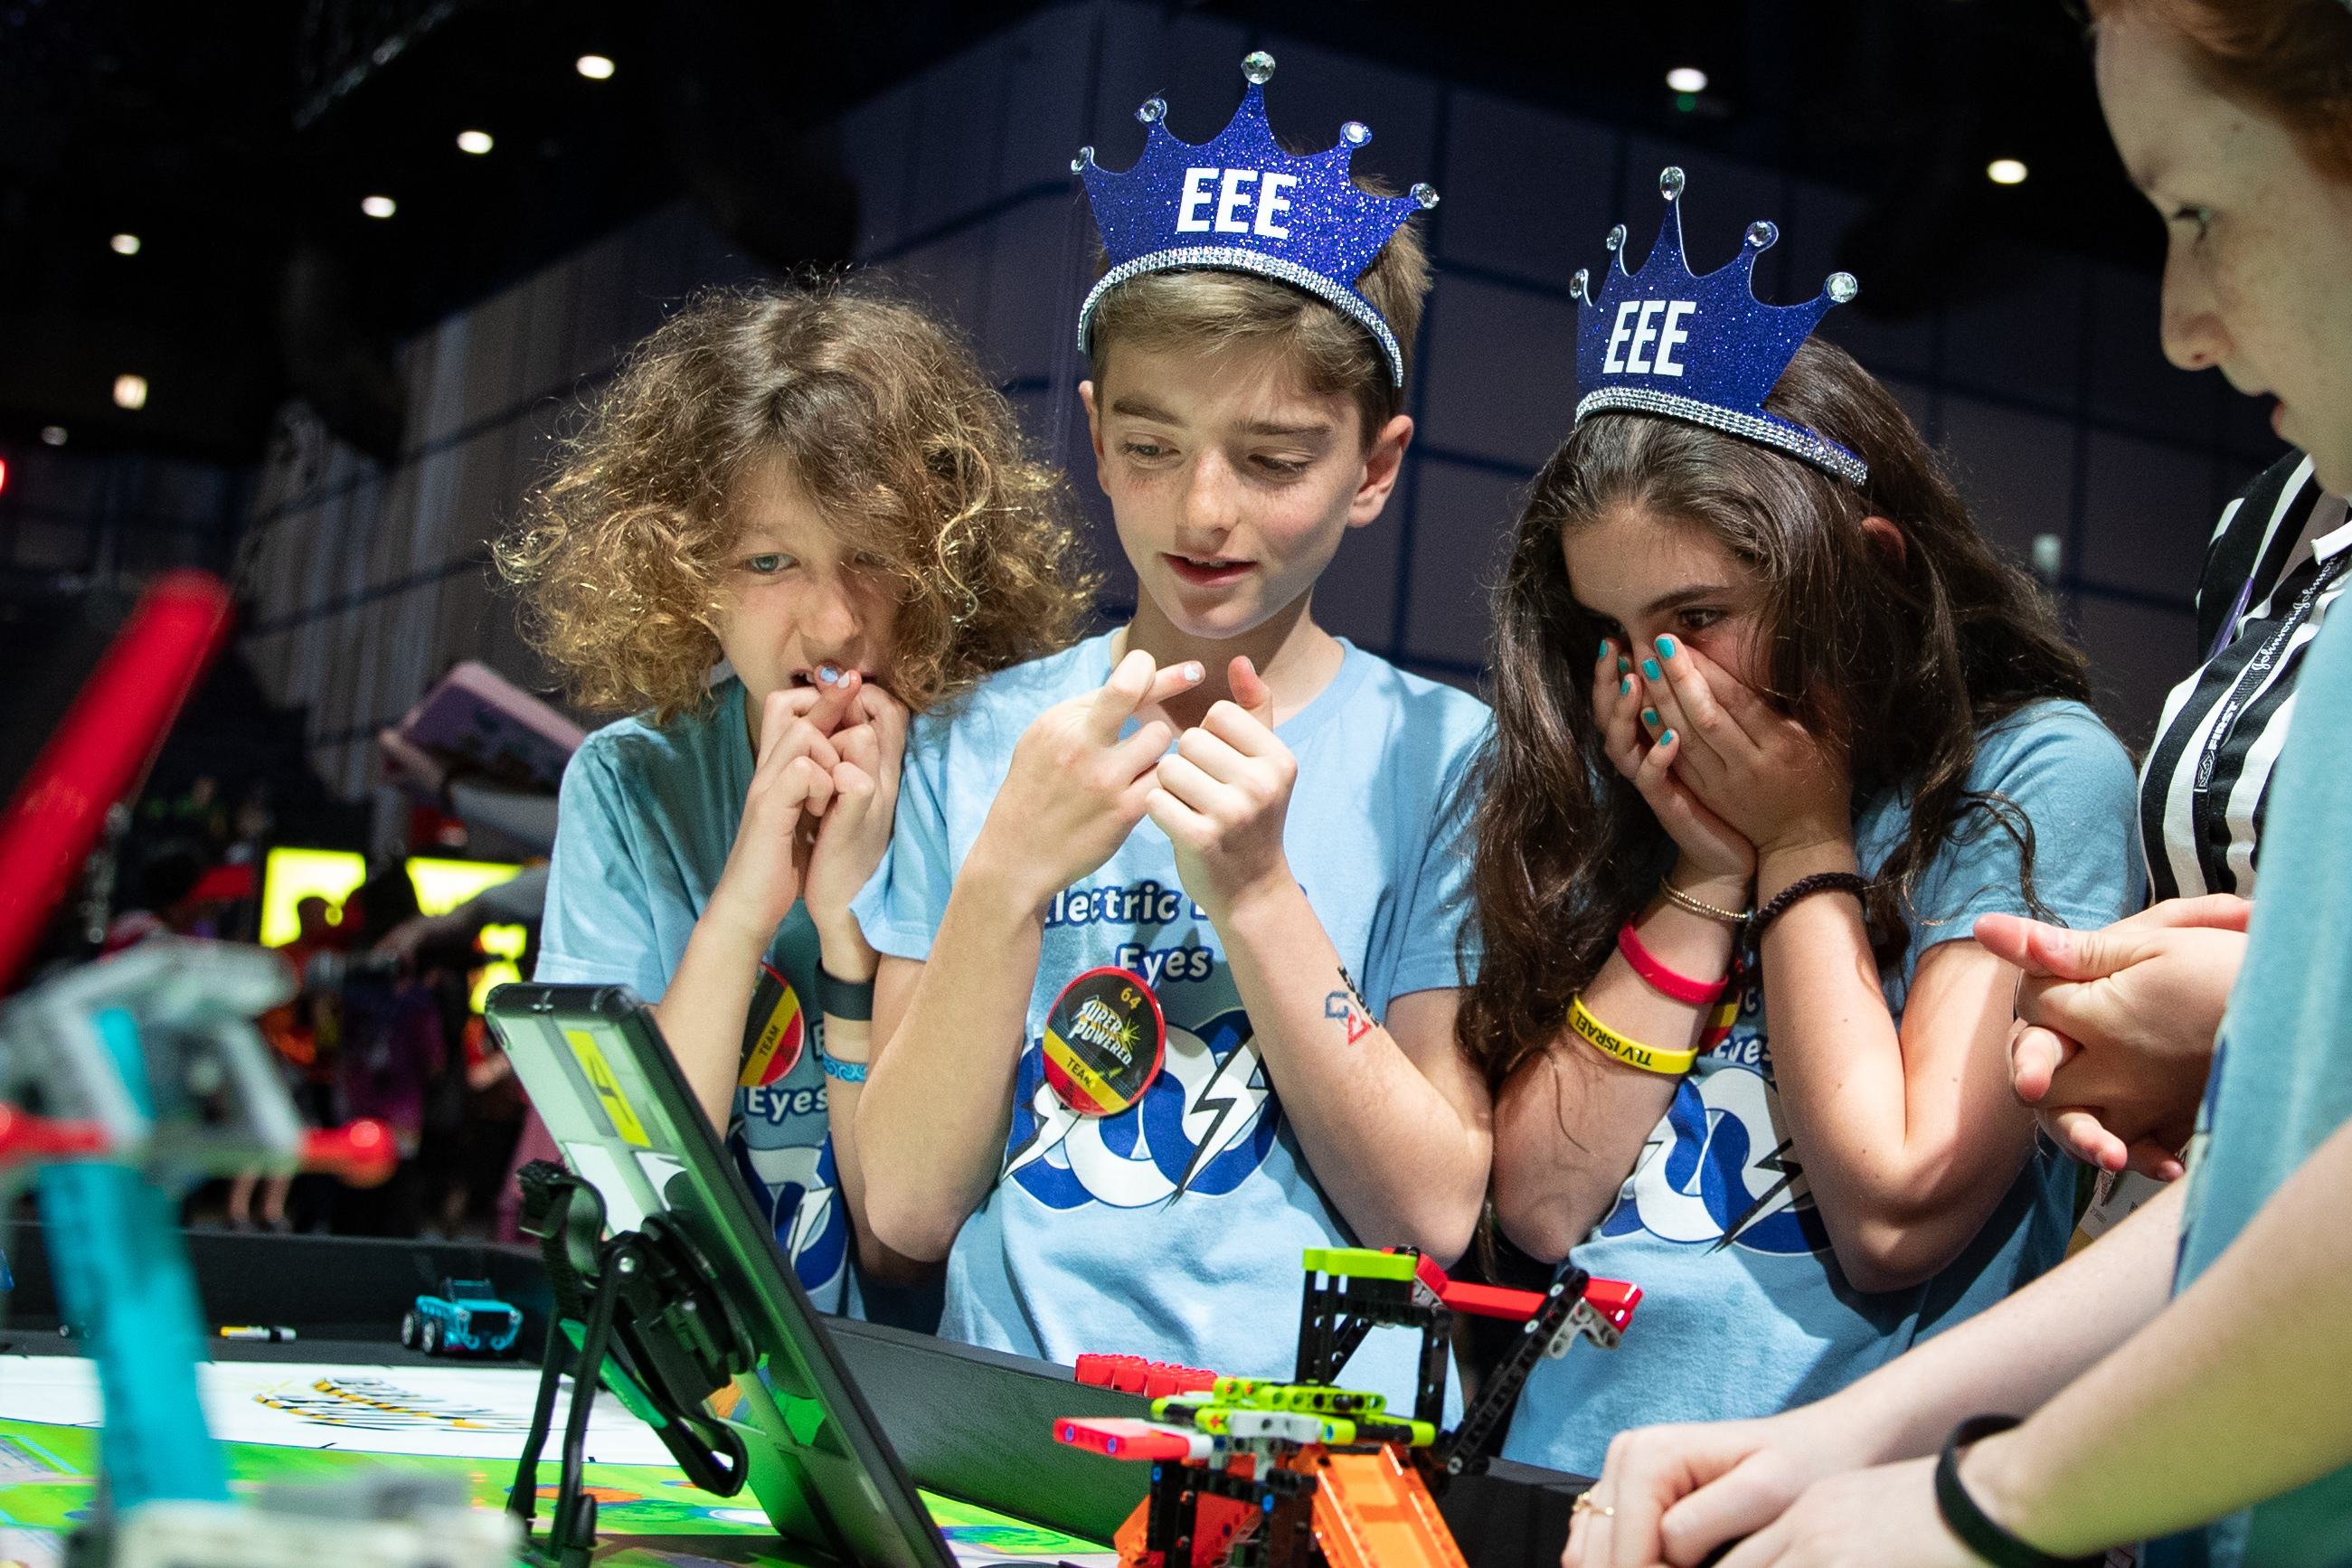 SUPERPOWERED excitement! A FIRST LEGO League team awaits match results on April 21 at the 2023 FIRST Championship in Houston.